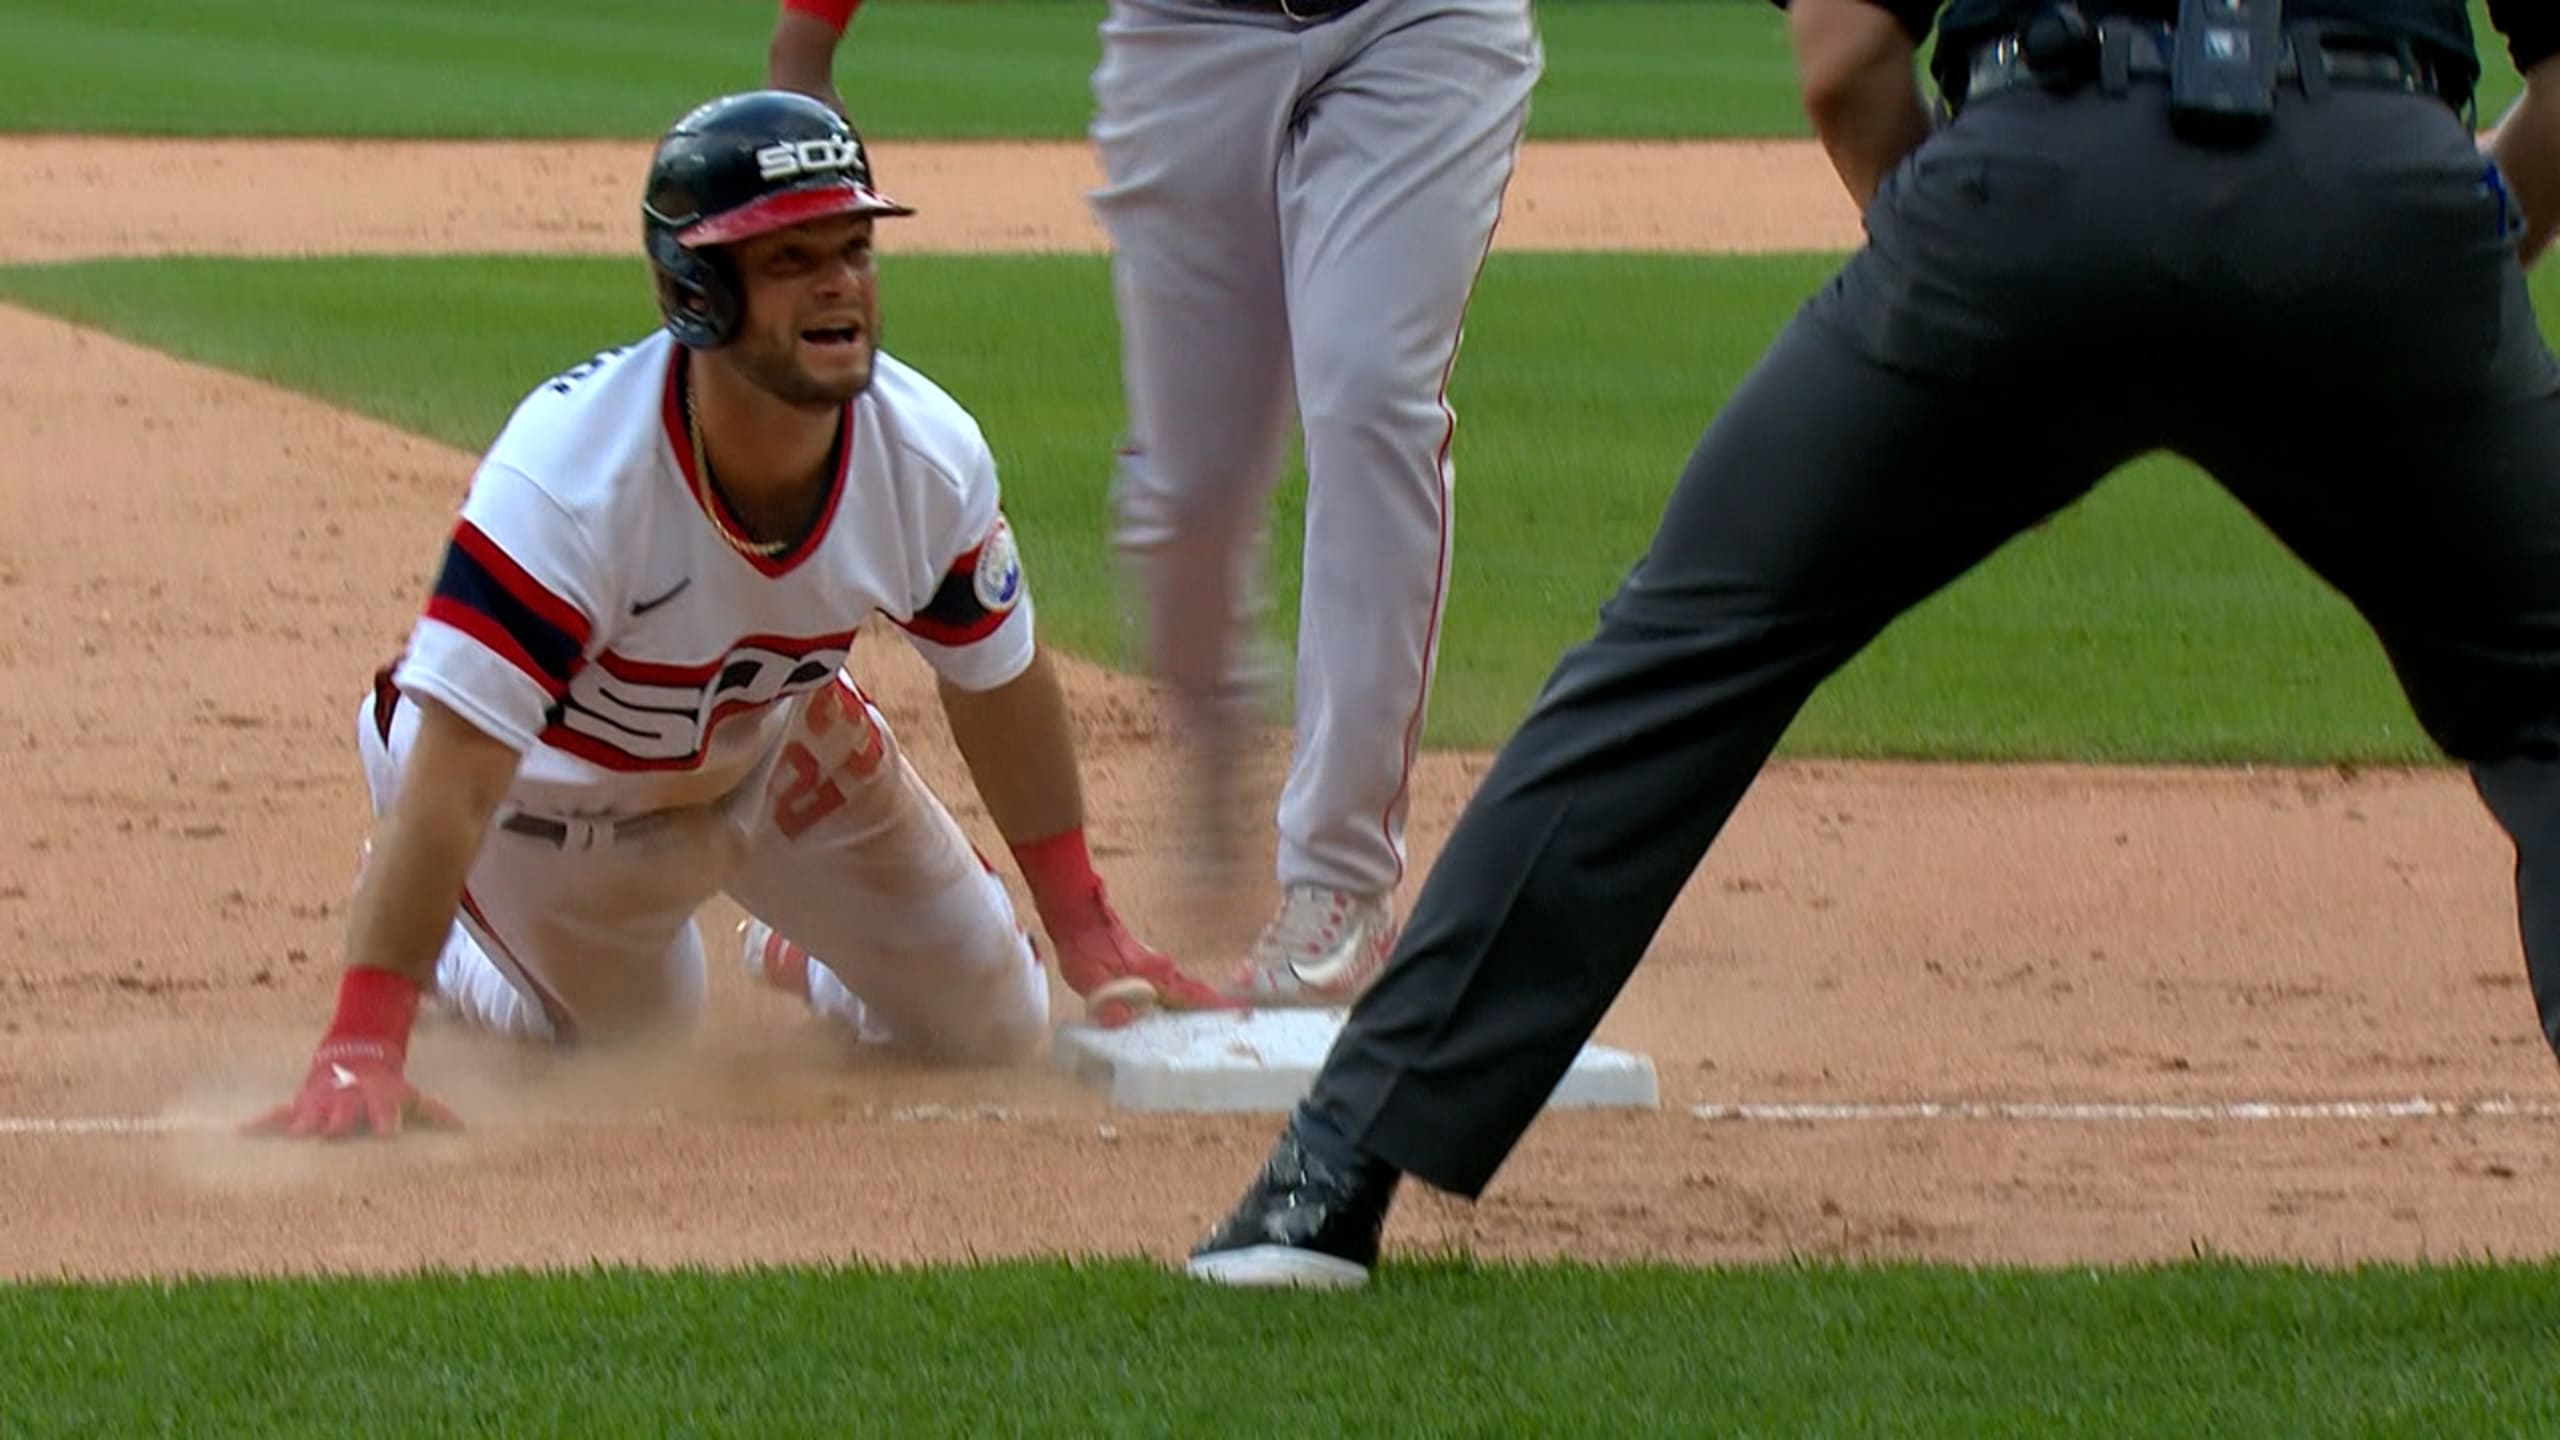 Chicago White Sox 4, Boston Red Sox 1: Color battle ends right